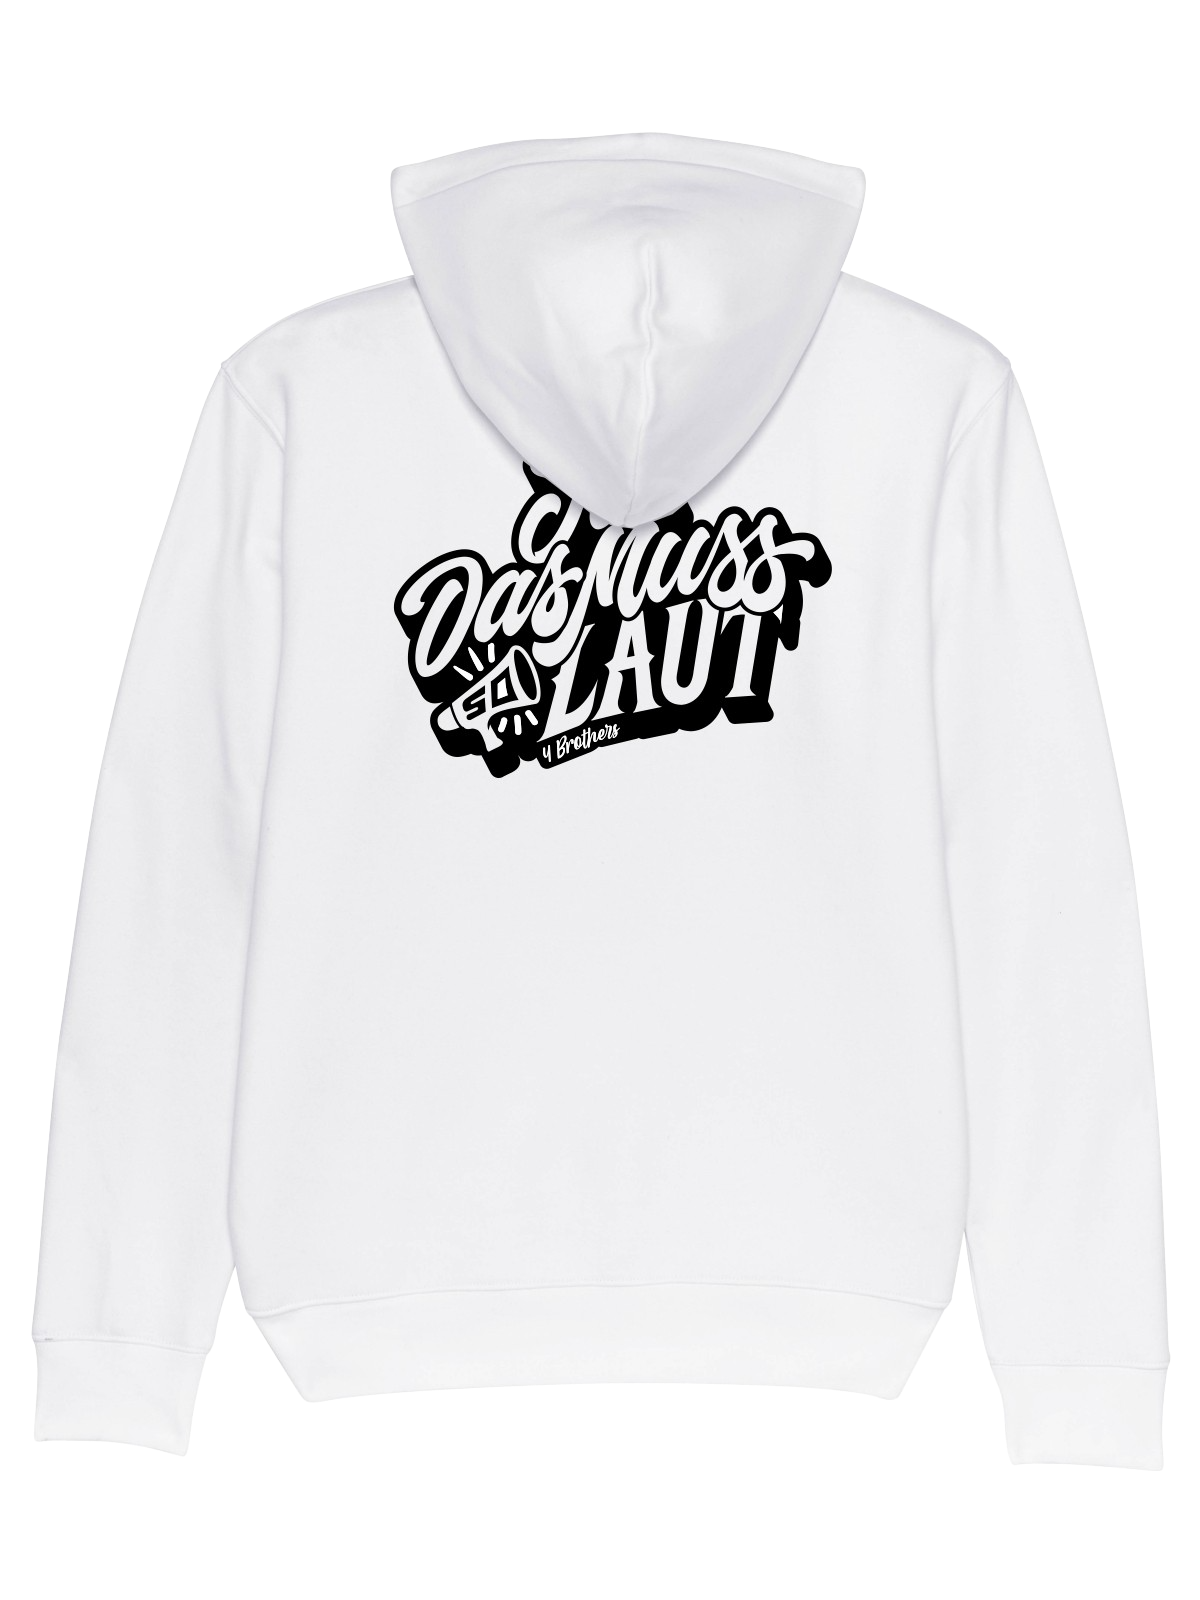 4Brothers Hoodie "das muss so laut"  New White 4XL